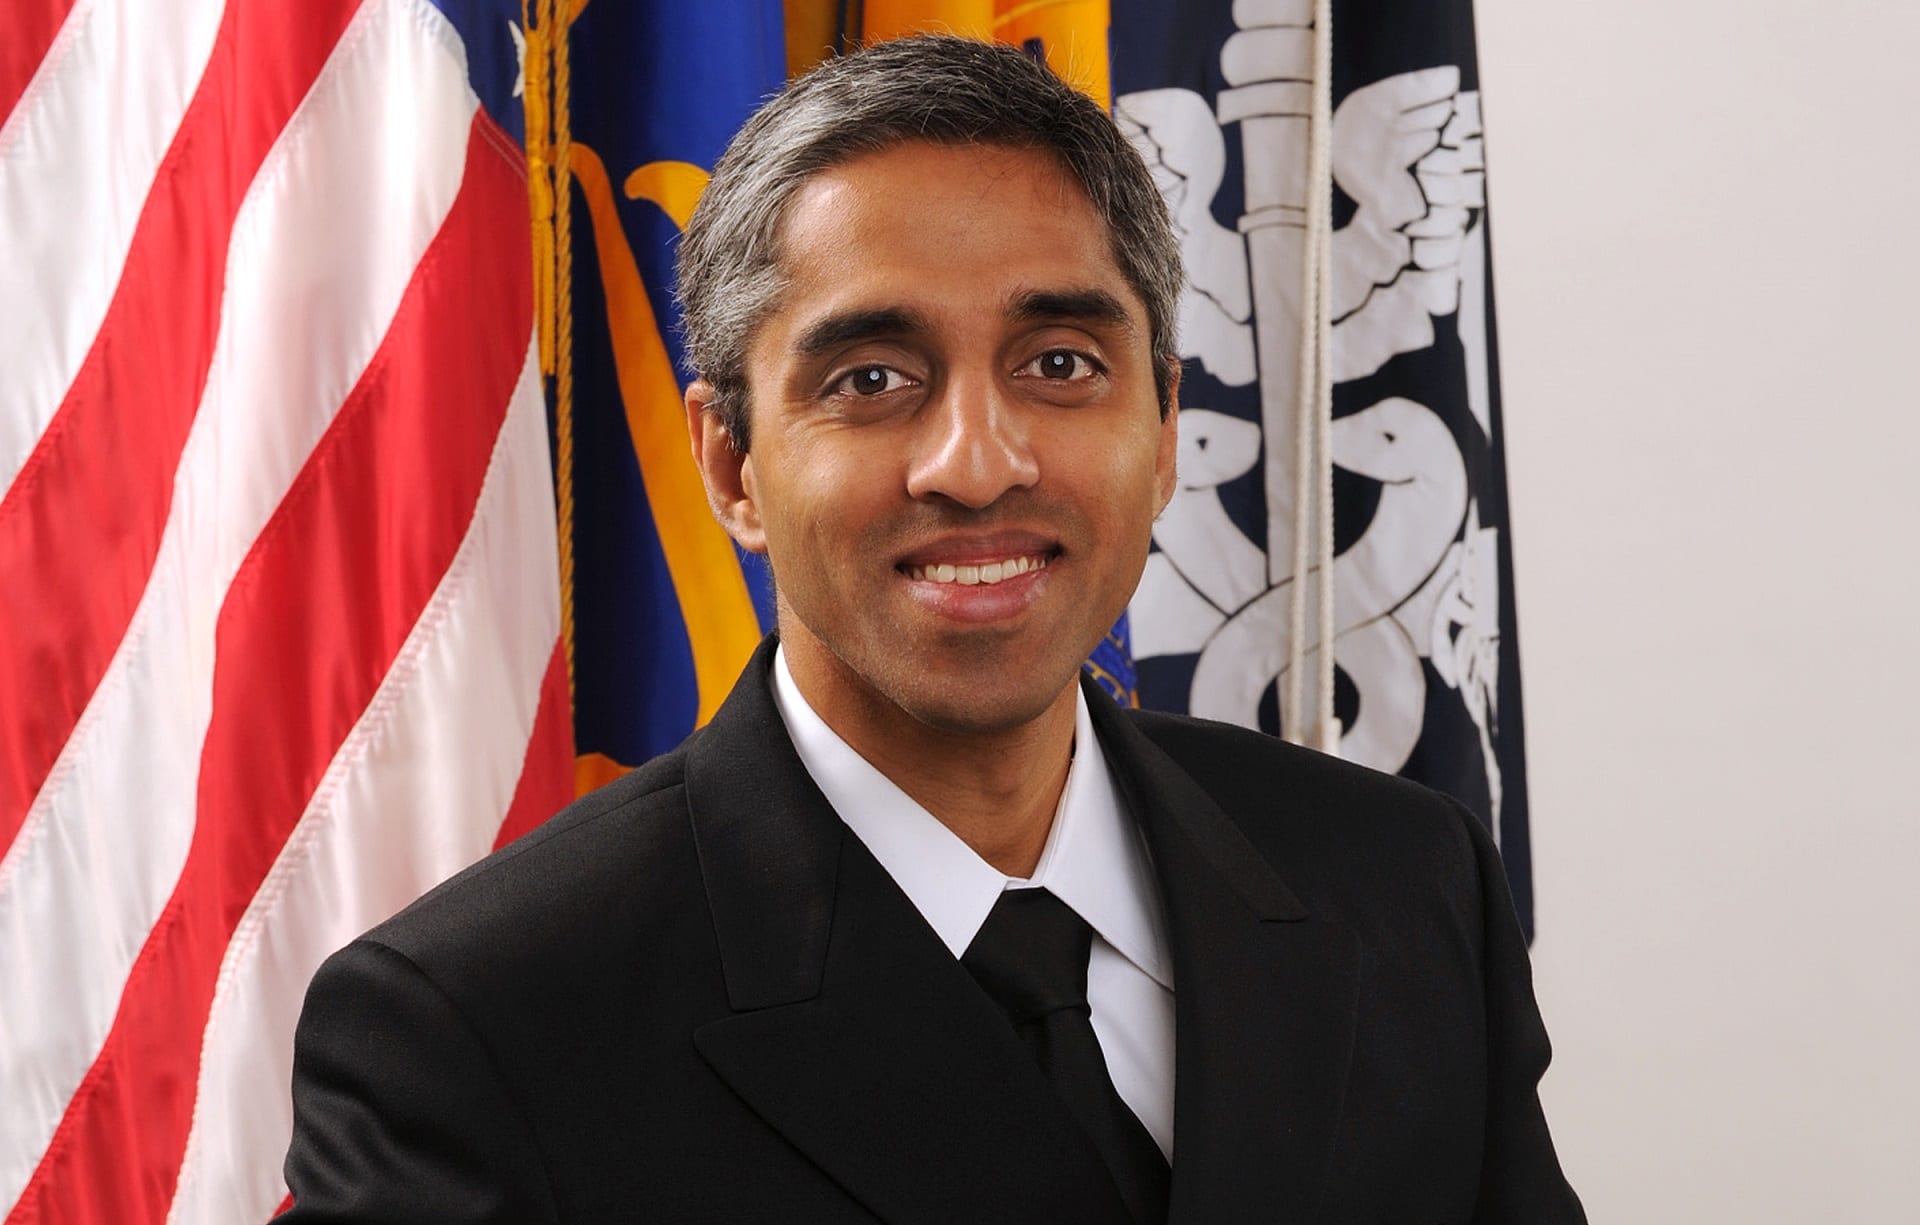 Dr Vivek Murthy,former surgeon general of the United States